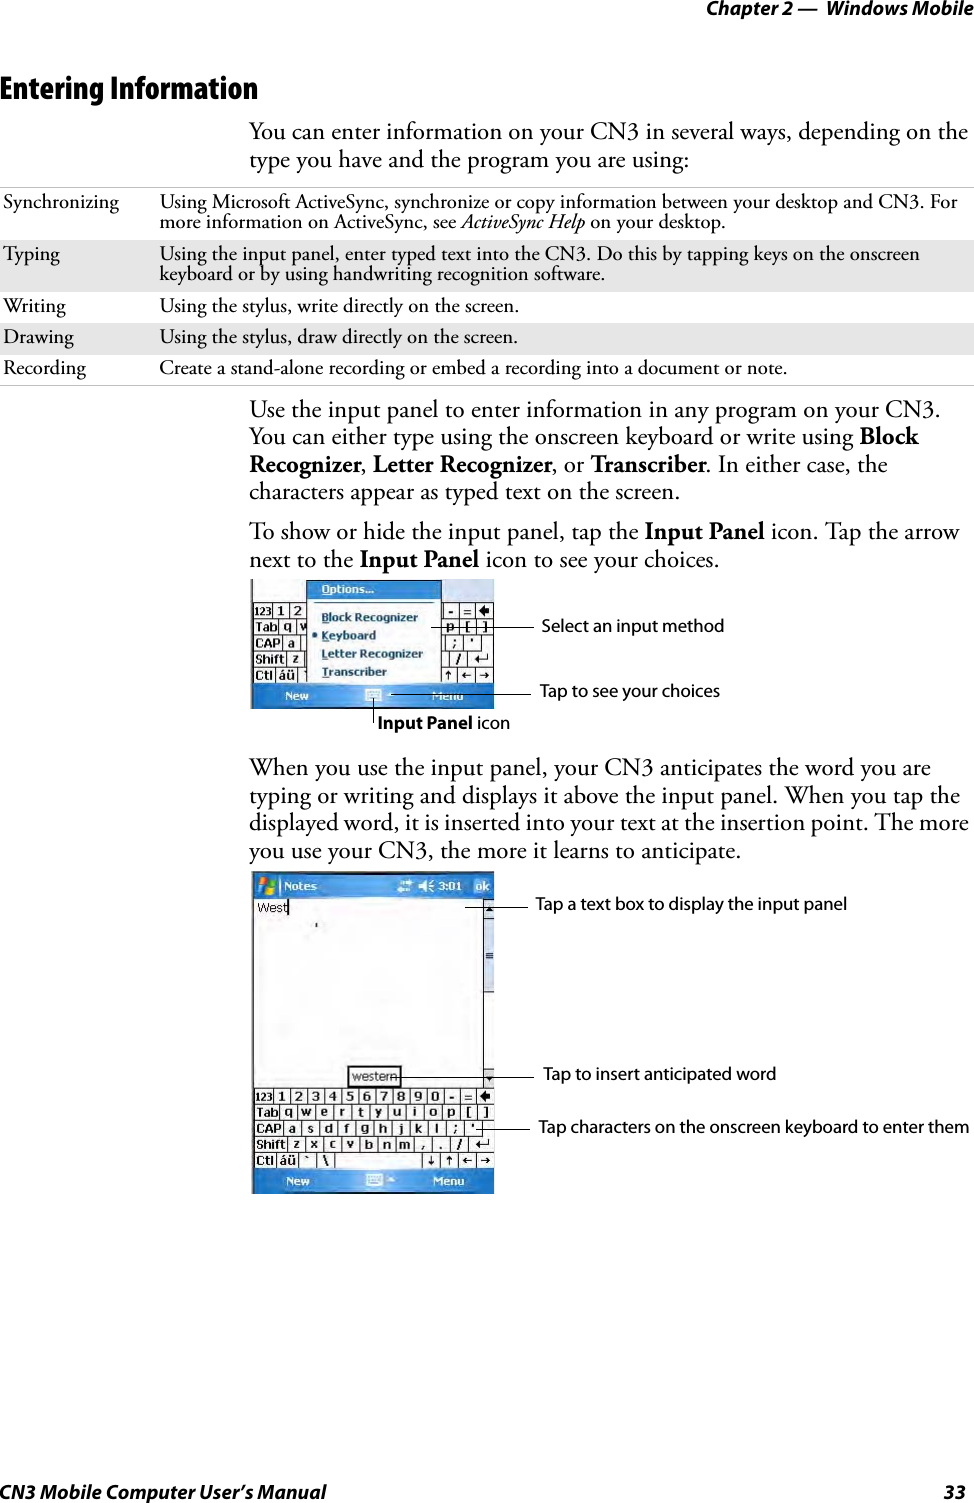 Chapter 2 —  Windows MobileCN3 Mobile Computer User’s Manual 33Entering InformationYou can enter information on your CN3 in several ways, depending on the type you have and the program you are using:Use the input panel to enter information in any program on your CN3. You can either type using the onscreen keyboard or write using Block Recognizer, Letter Recognizer, or Transcriber. In either case, the characters appear as typed text on the screen.To show or hide the input panel, tap the Input Panel icon. Tap the arrow next to the Input Panel icon to see your choices.When you use the input panel, your CN3 anticipates the word you are typing or writing and displays it above the input panel. When you tap the displayed word, it is inserted into your text at the insertion point. The more you use your CN3, the more it learns to anticipate.Synchronizing Using Microsoft ActiveSync, synchronize or copy information between your desktop and CN3. For more information on ActiveSync, see ActiveSync Help on your desktop.Typing Using the input panel, enter typed text into the CN3. Do this by tapping keys on the onscreen keyboard or by using handwriting recognition software.Writing Using the stylus, write directly on the screen.Drawing Using the stylus, draw directly on the screen.Recording Create a stand-alone recording or embed a recording into a document or note.Select an input methodTap to see your choicesInput Panel iconTap a text box to display the input panelTap to insert anticipated wordTap characters on the onscreen keyboard to enter them